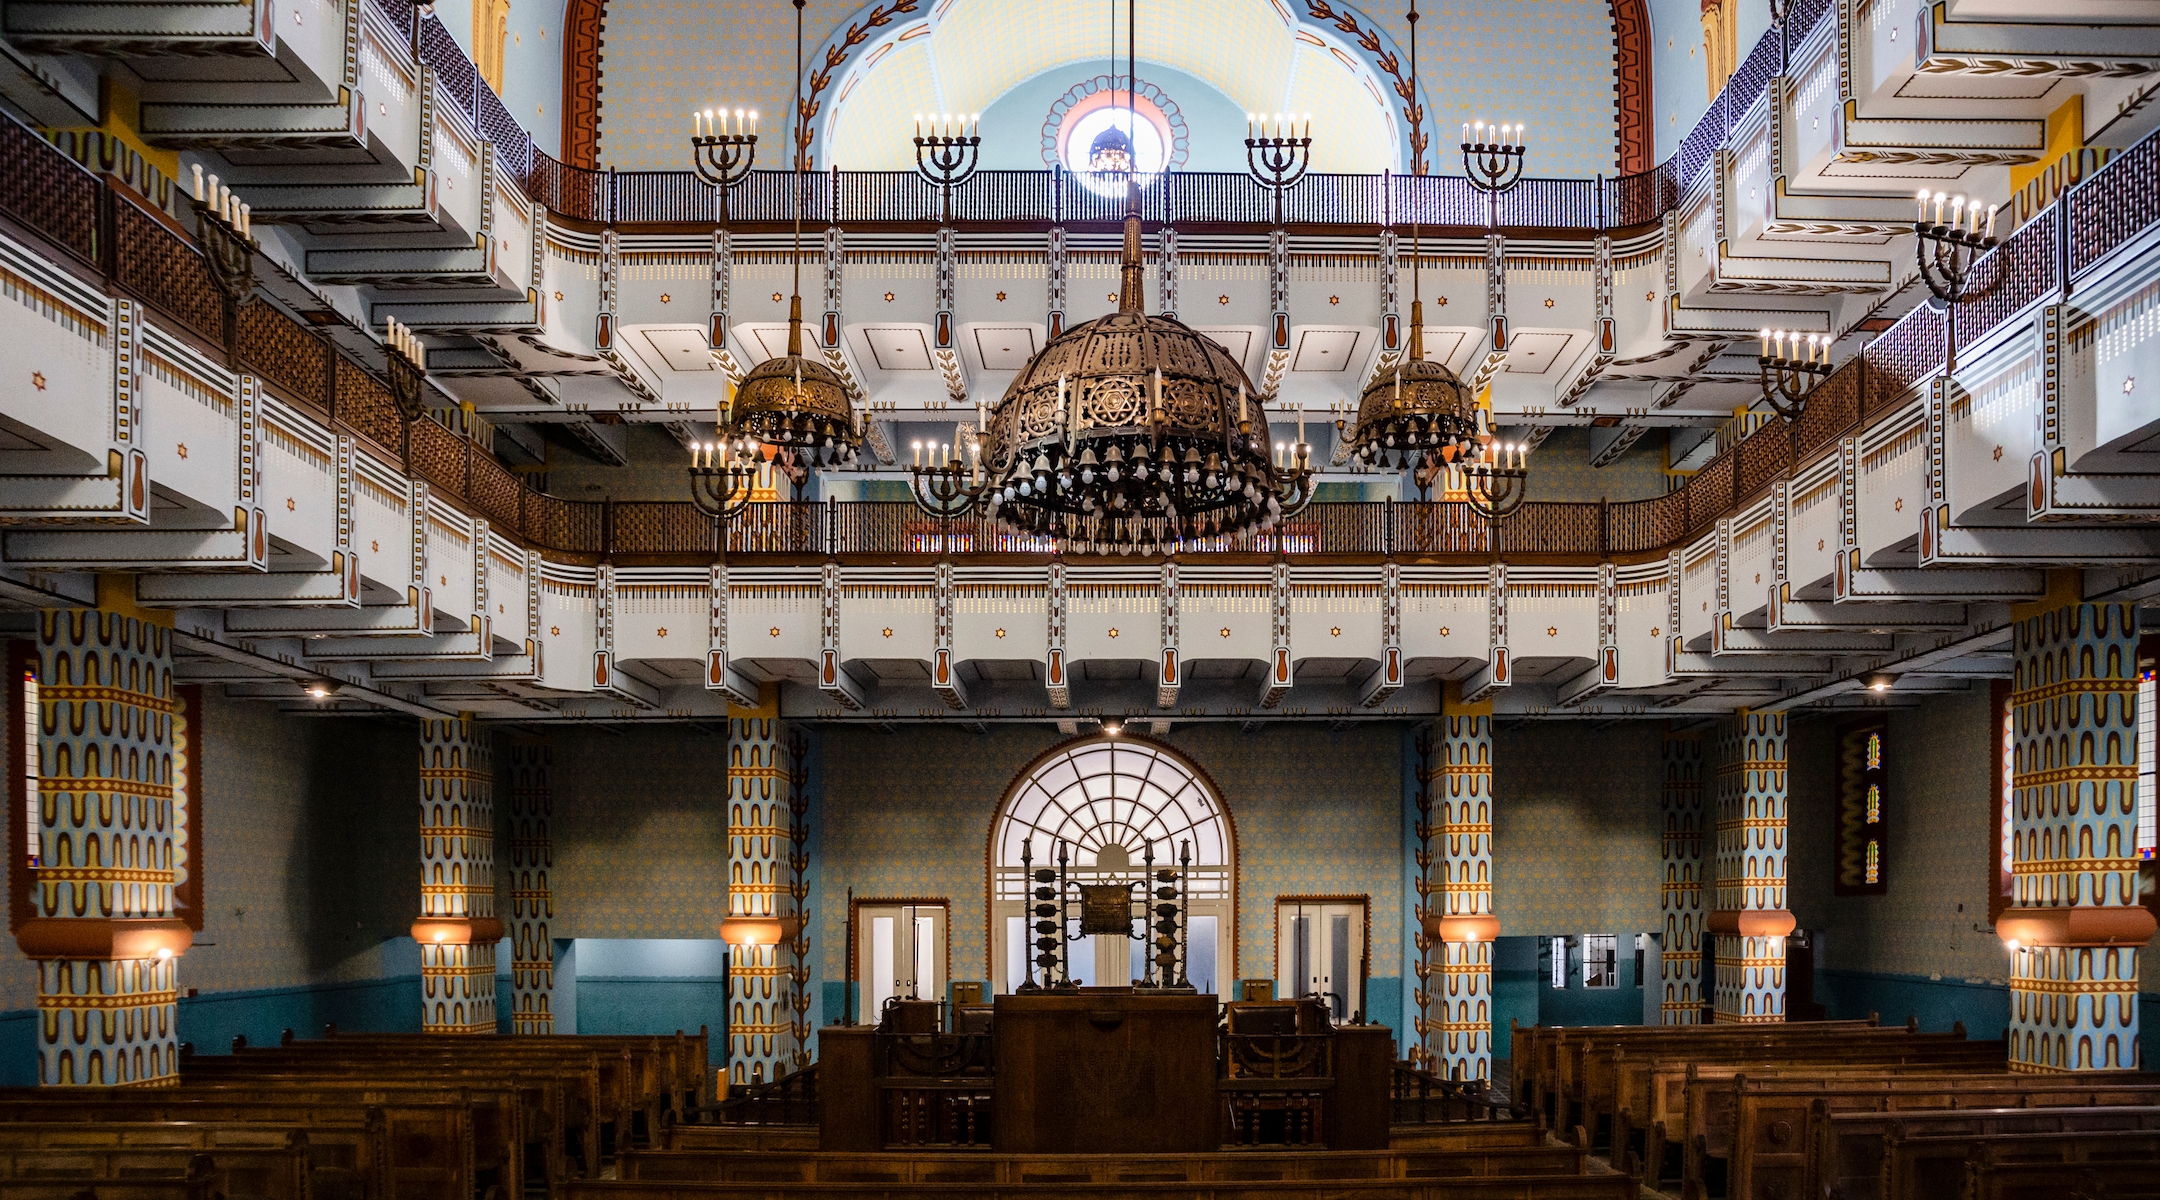 A view of Kazinczy Street Synagogue in Budapest, Hungary ,on Oct. 15, 2021. (Rita Franca/NurPhoto via Getty Images)